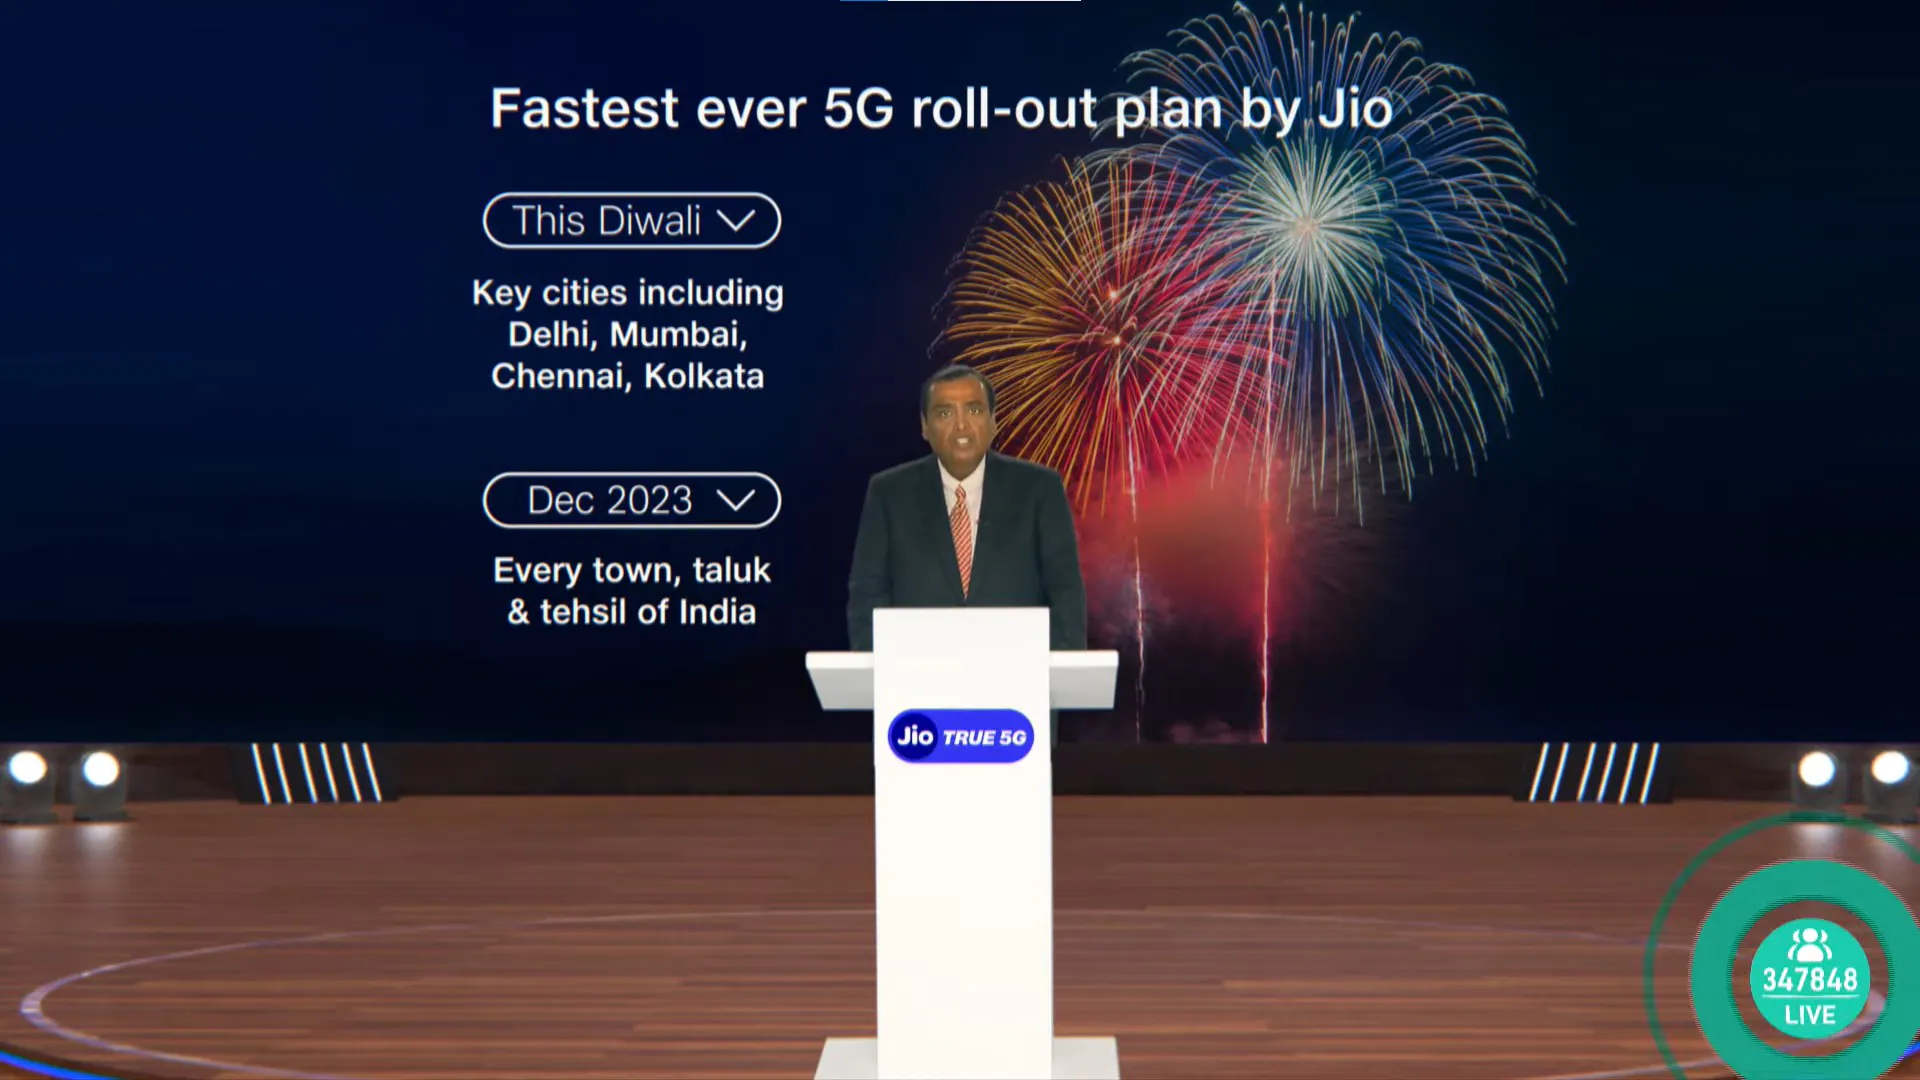 Reliance Jio to Roll Out 5G Connectivity in India by October, Plans Full Coverage by 2023 End